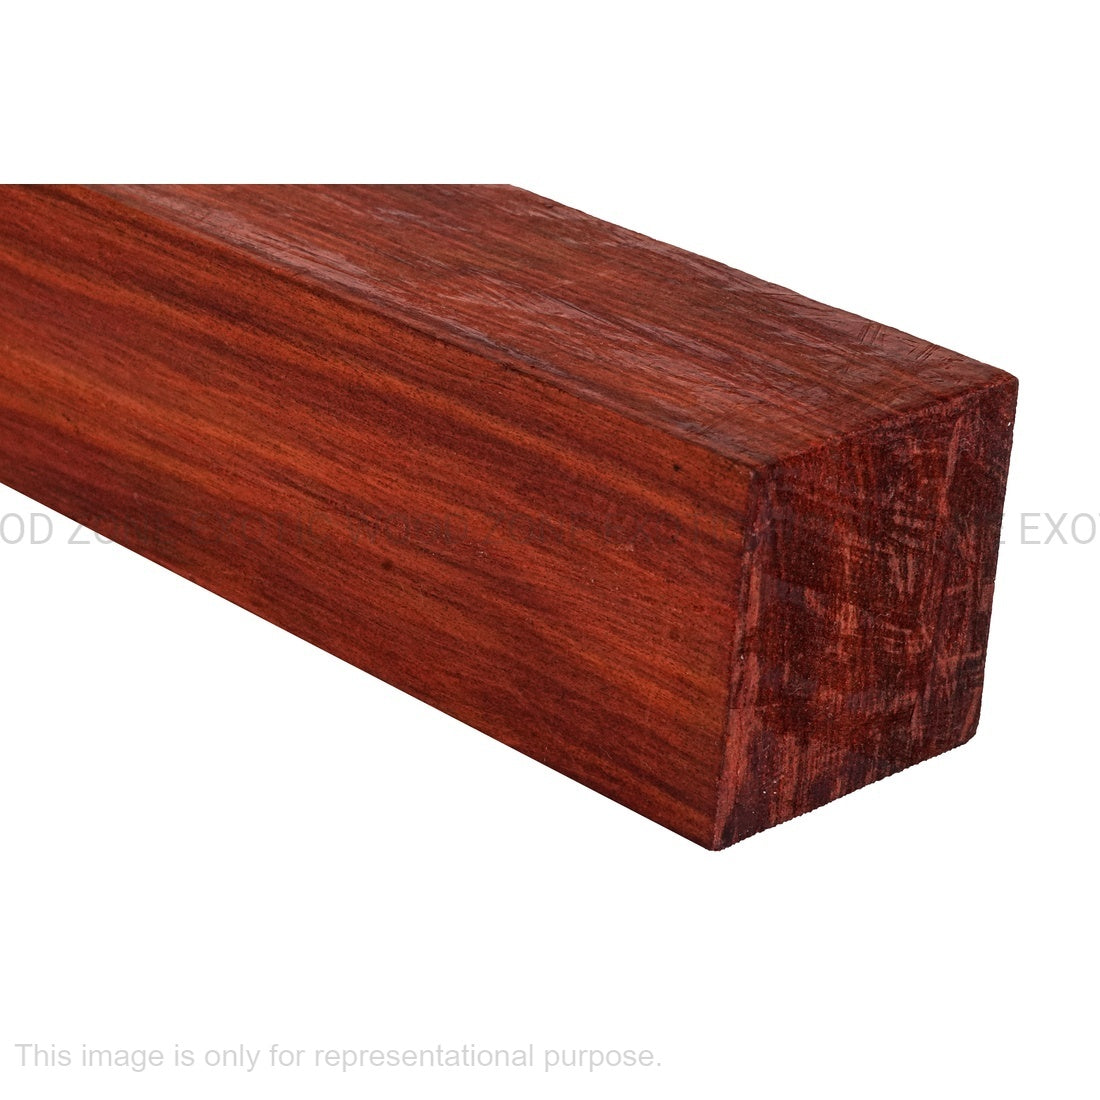 Redheart Wood Turning Blanks 1-1/2&quot; x 1-1/2&quot; x 24&quot; - Exotic Wood Zone - Buy online Across USA 